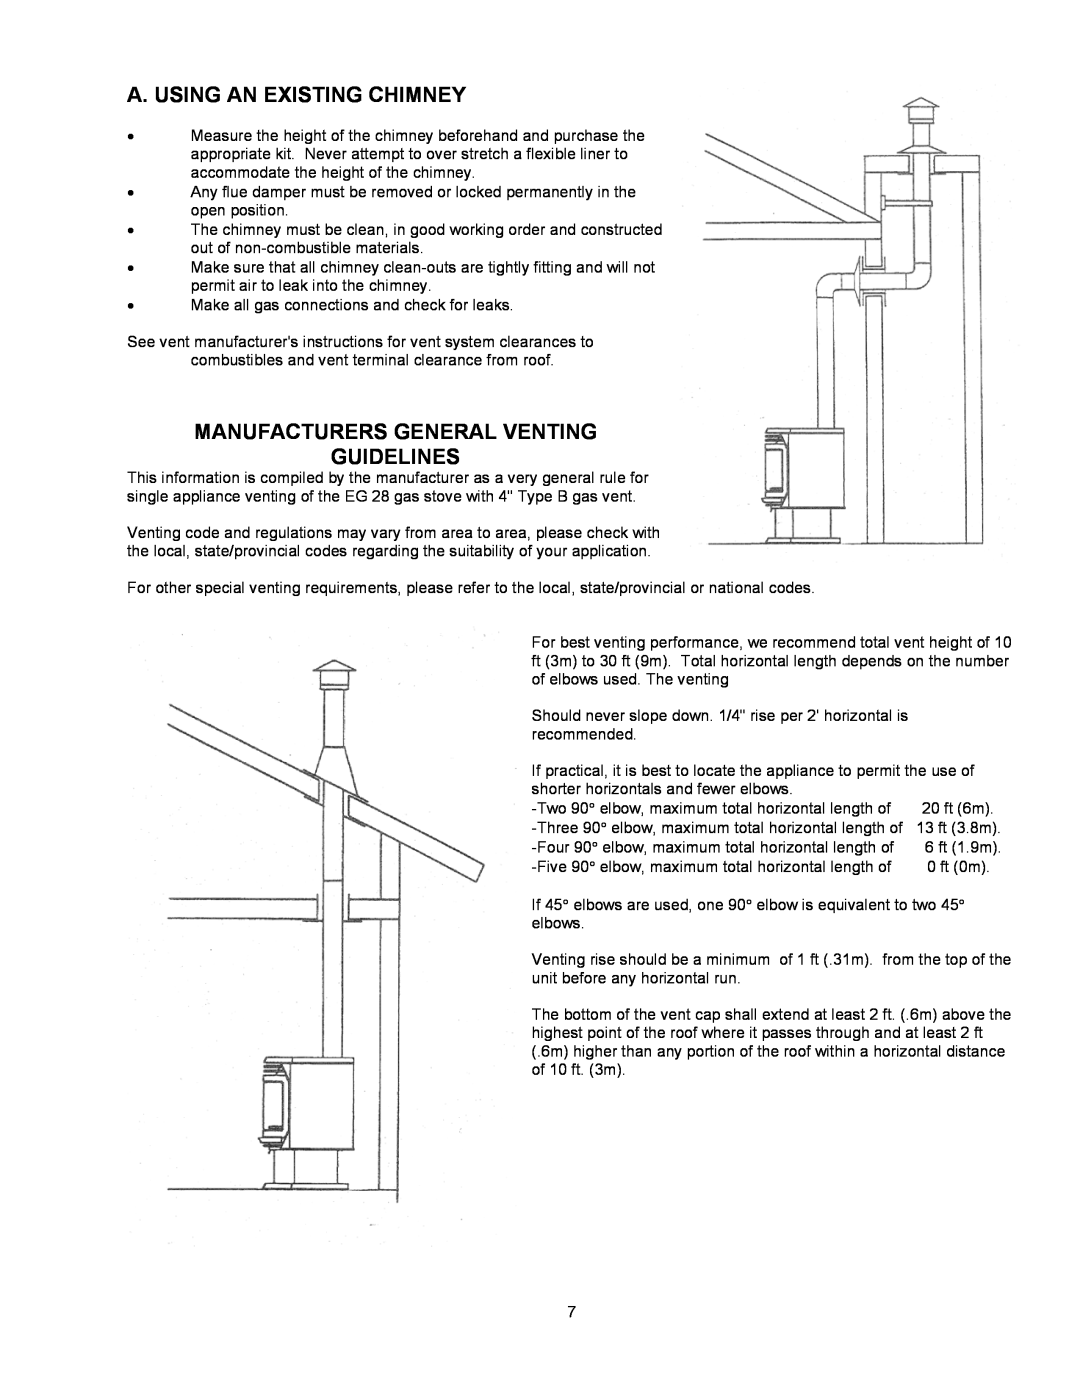 Enviro EG 28 B owner manual A. Using An Existing Chimney, Manufacturers General Venting Guidelines 